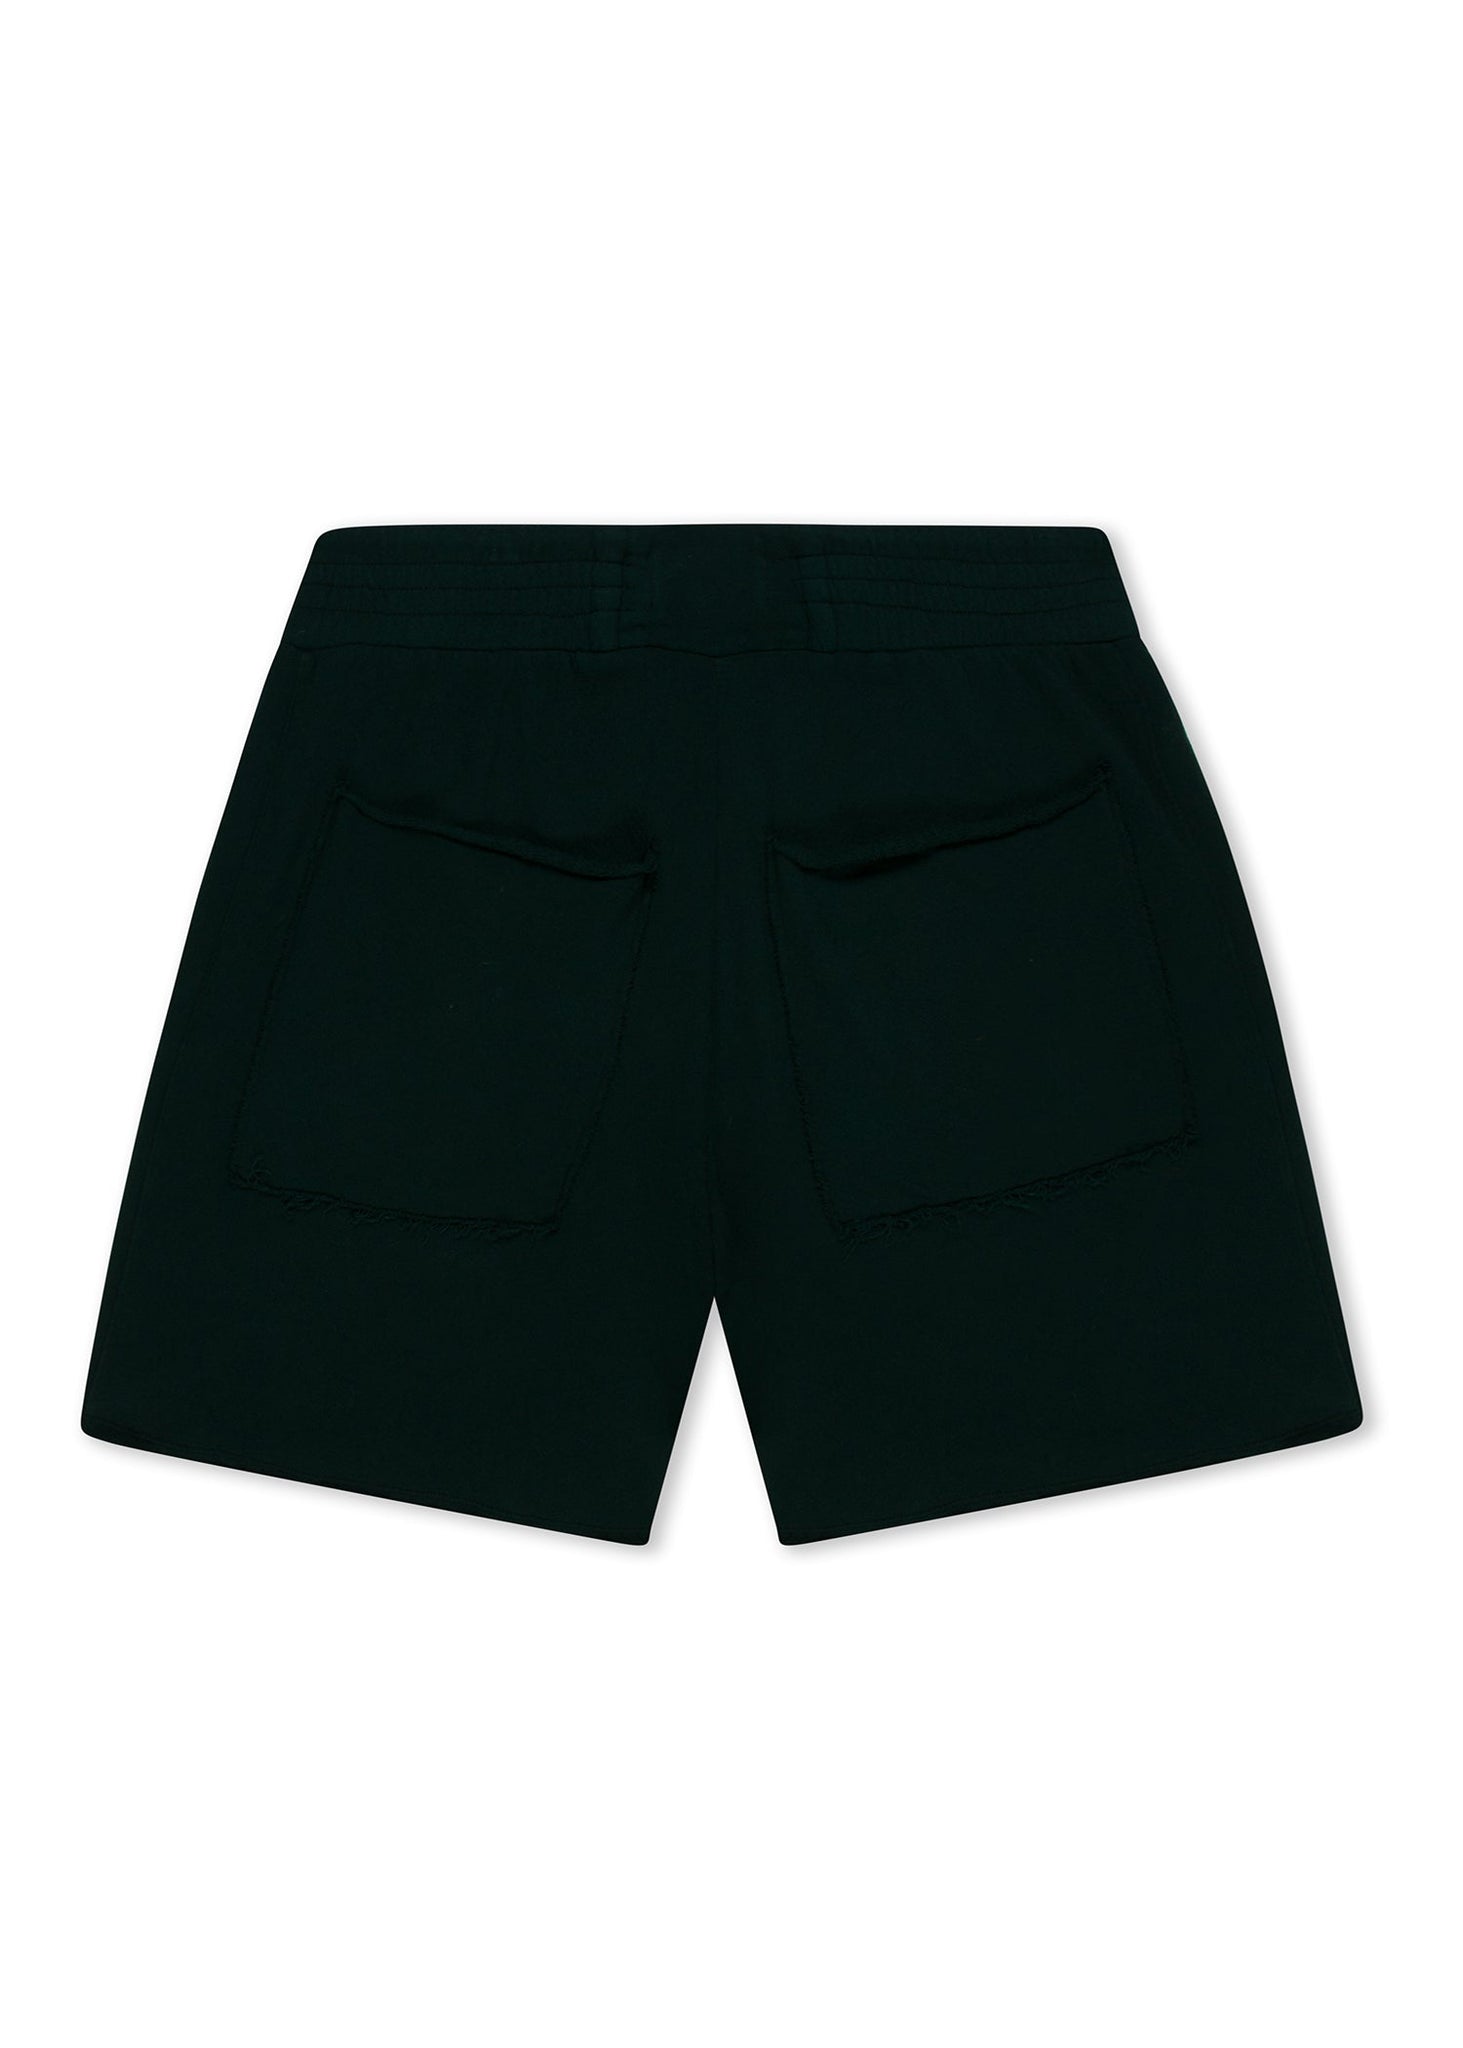 French Terry Yacht Short